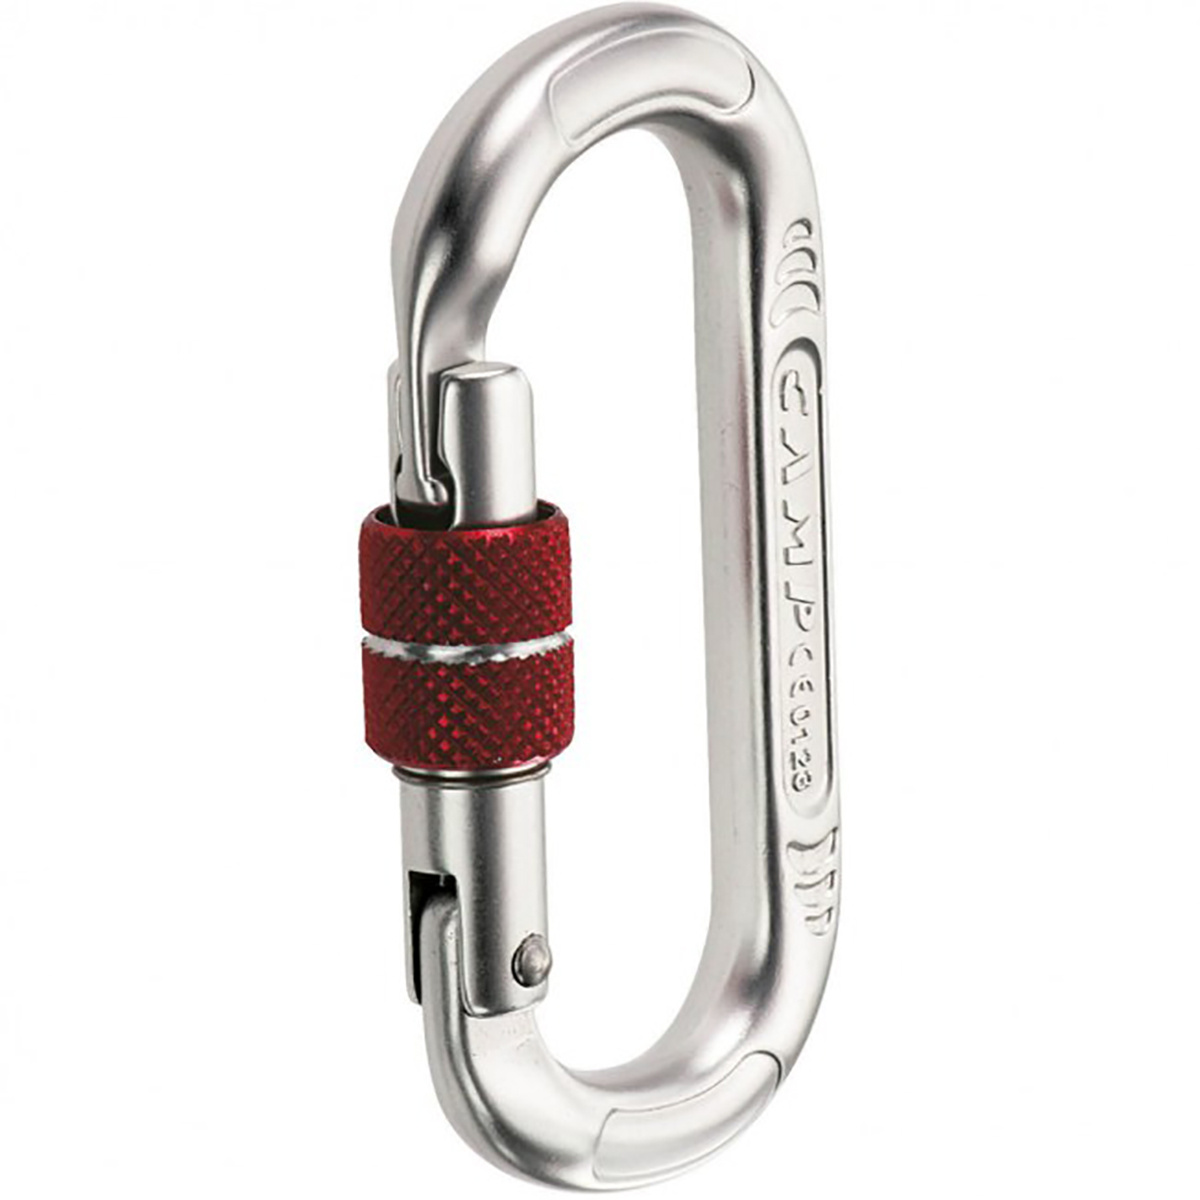 Image of Camp Moschettone Compact Oval Lock